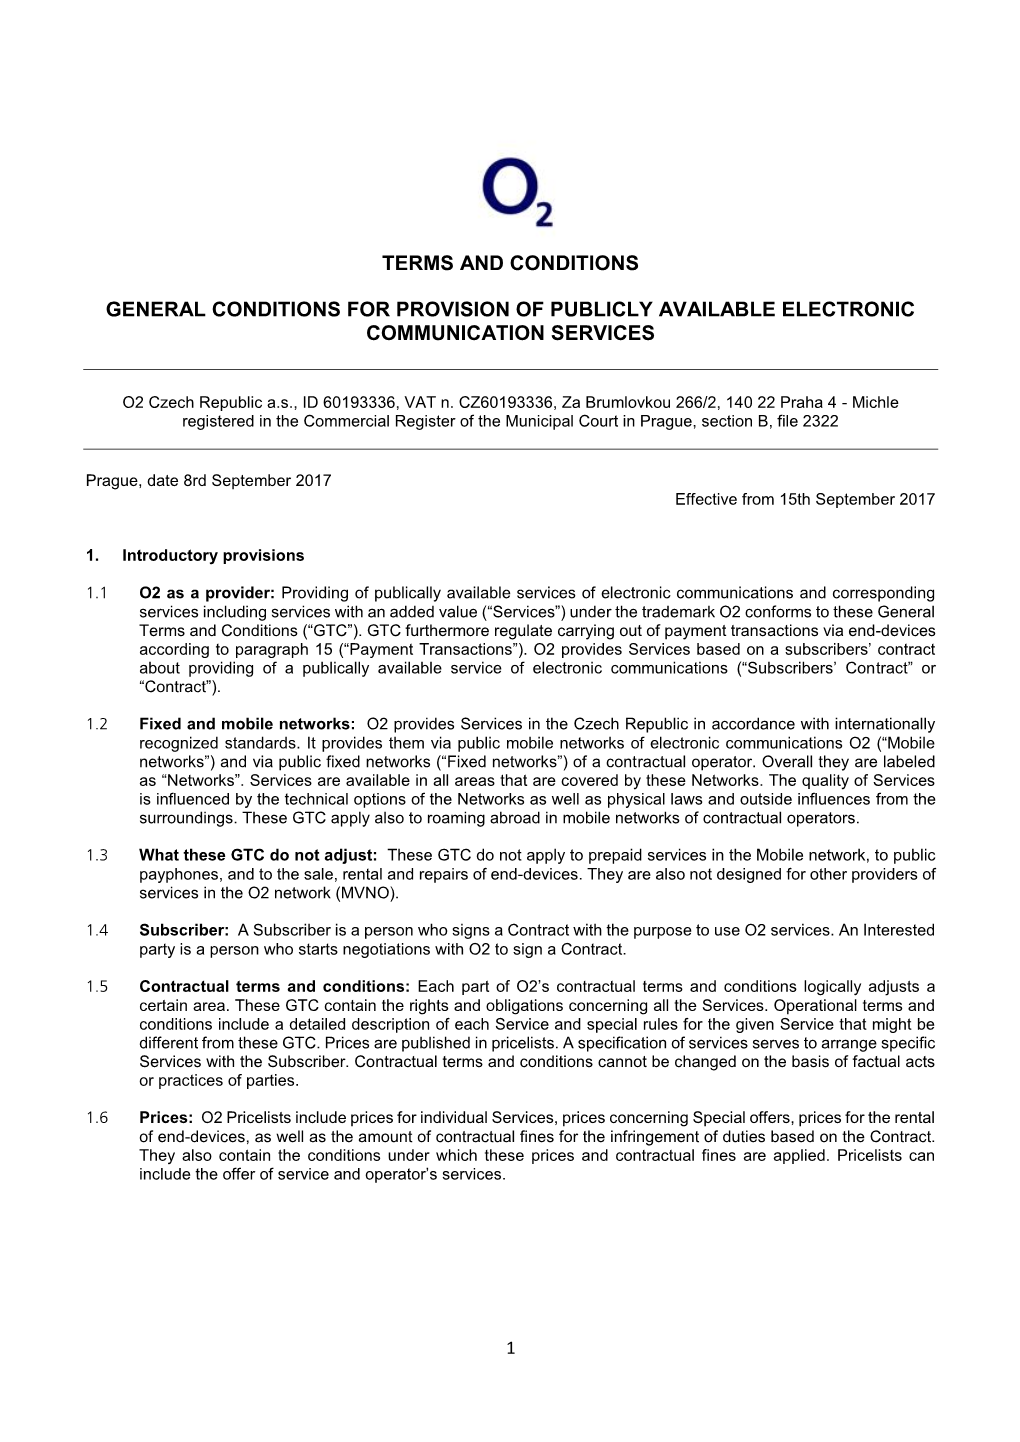 General Conditions for Provision of Publicly Available Electronic Communication Services